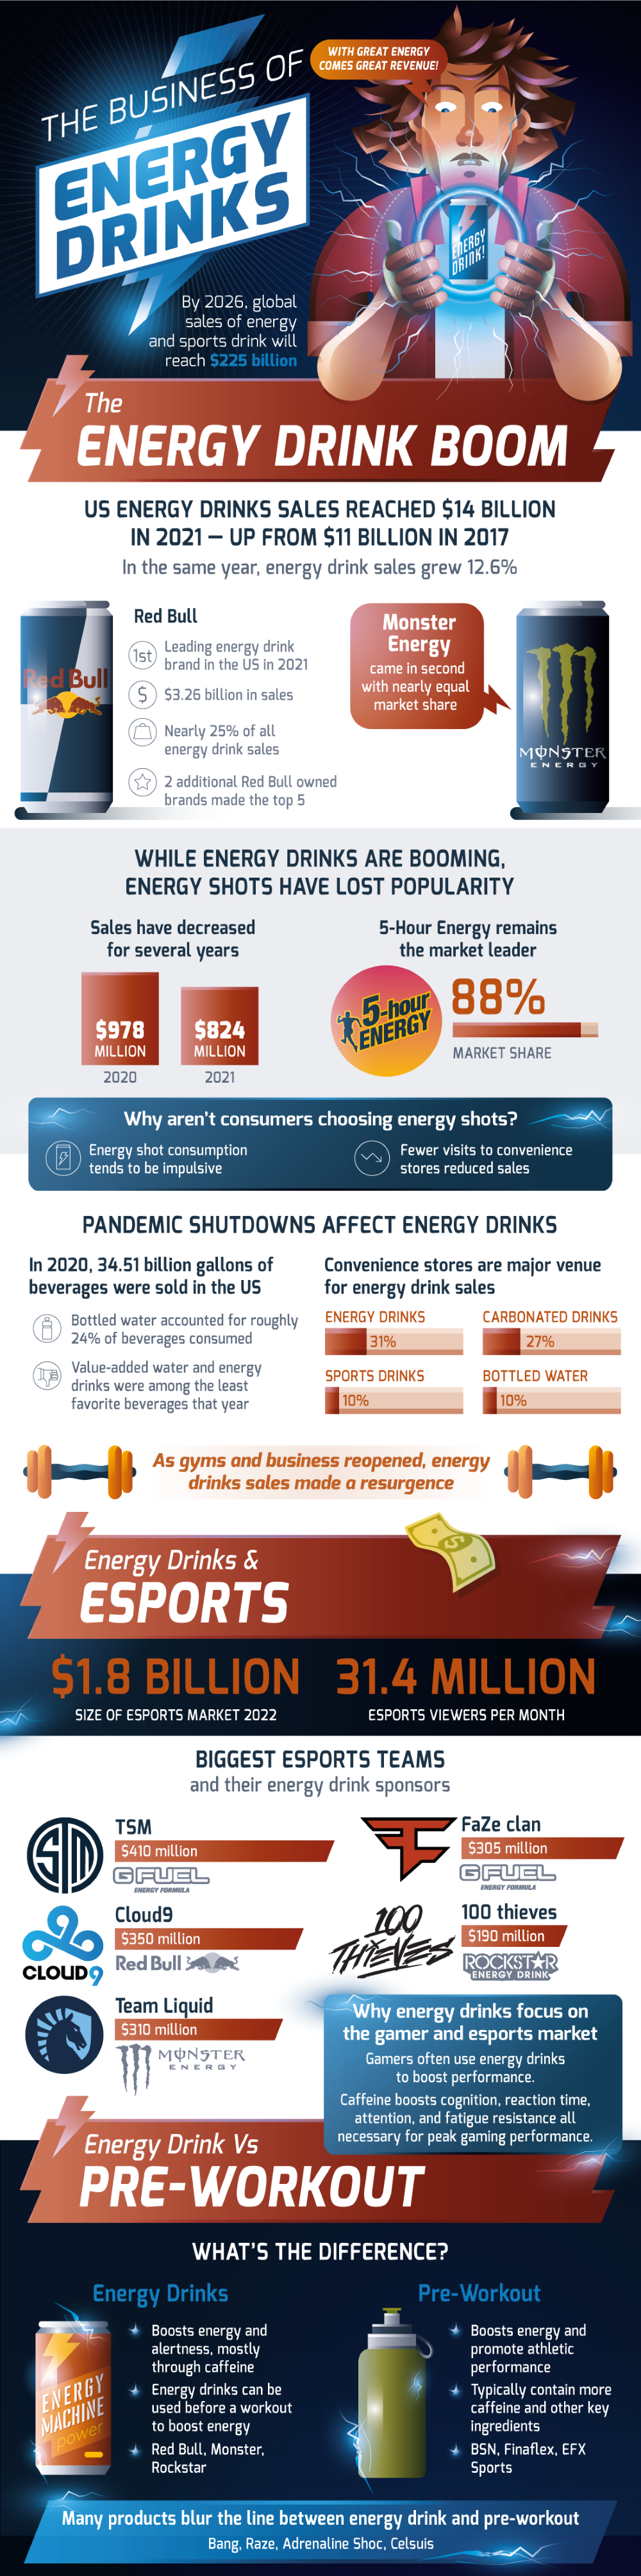 the-business-of-energy-drinks1